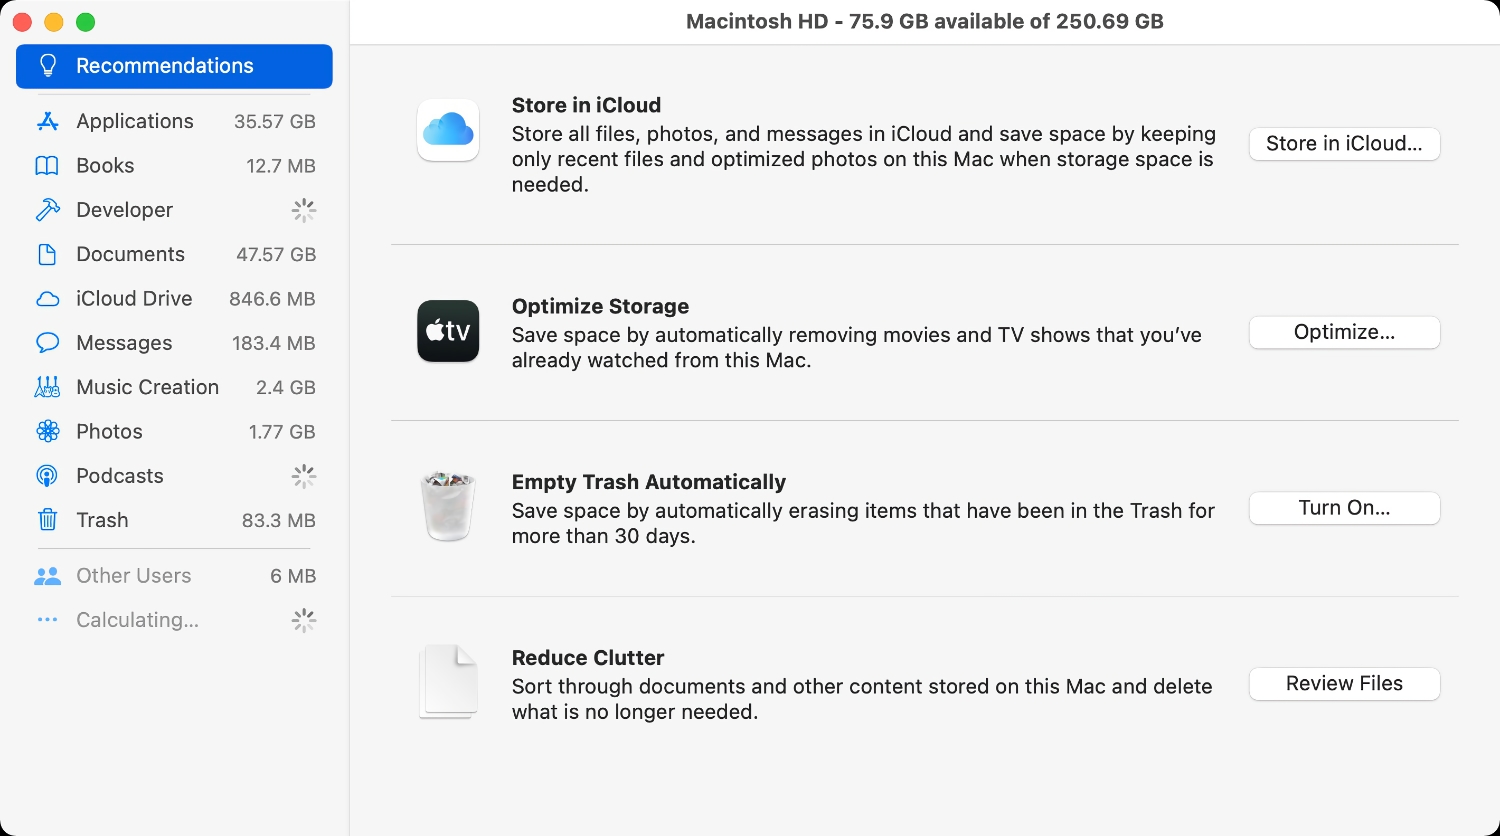 how to get pictures from icloud with optimized storage